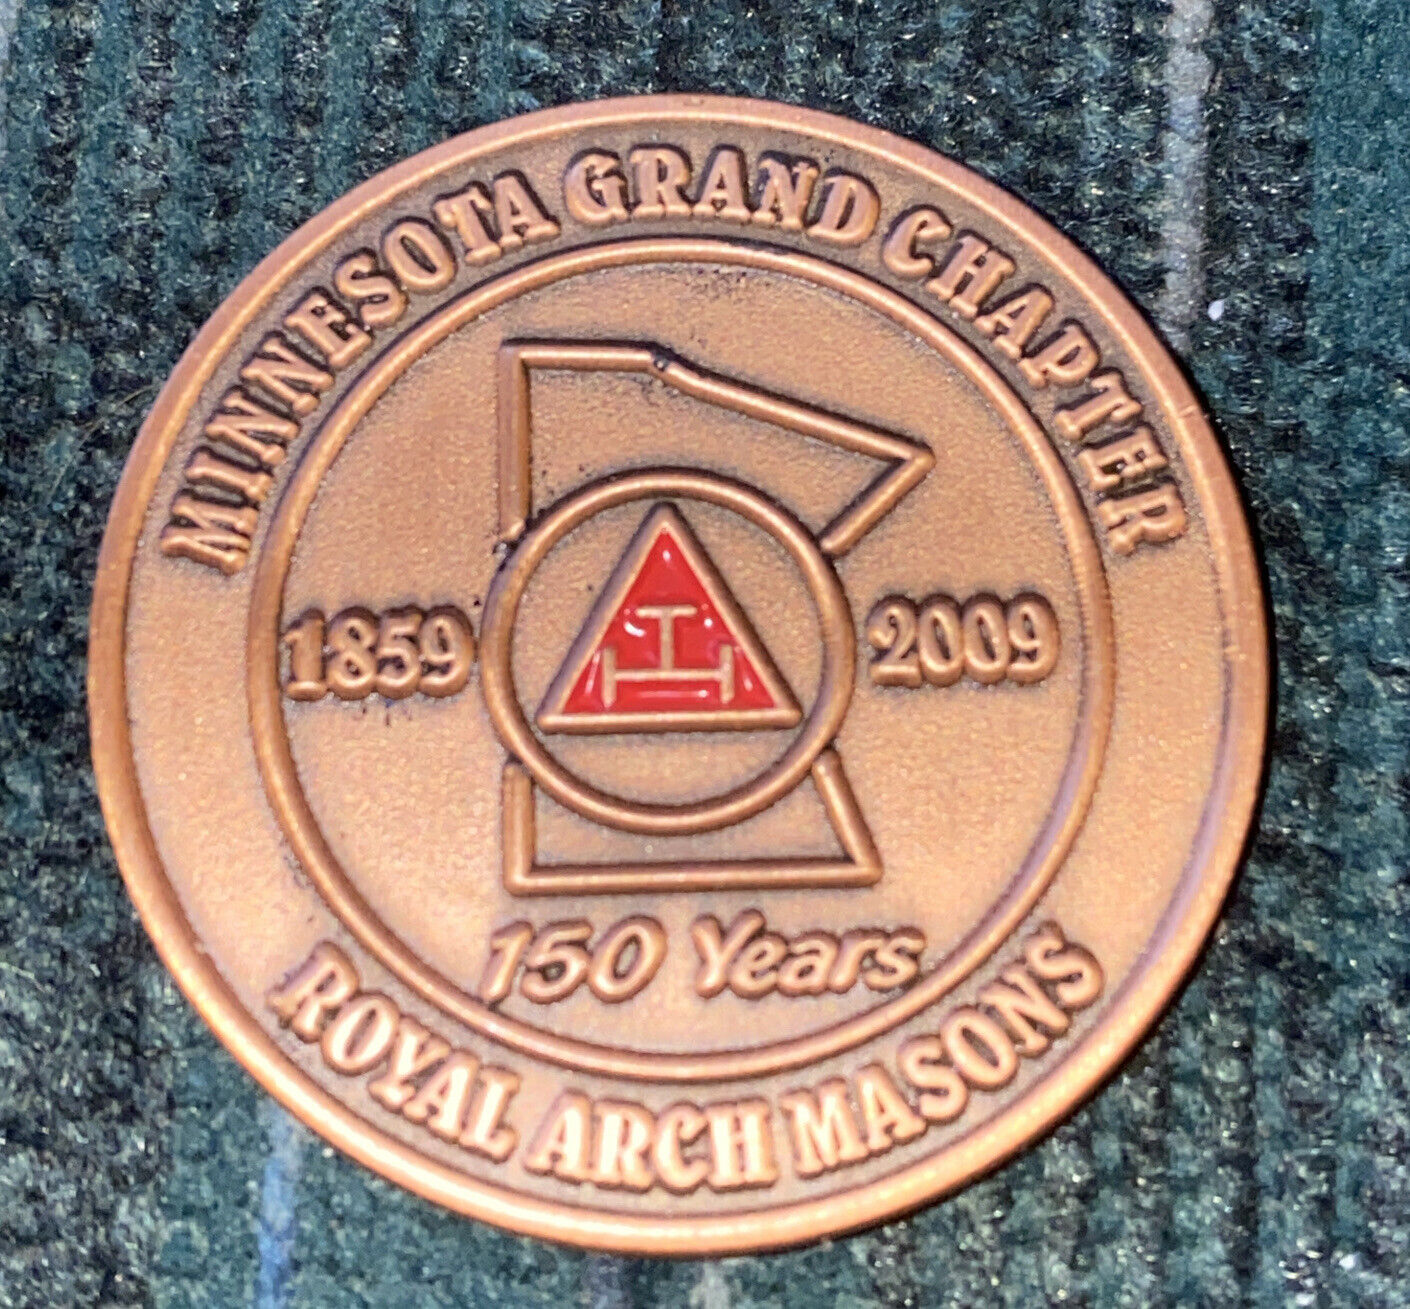 1859-2009 Minnesota Grand Chapter Royal Arch Masons Coin Token 150 Years